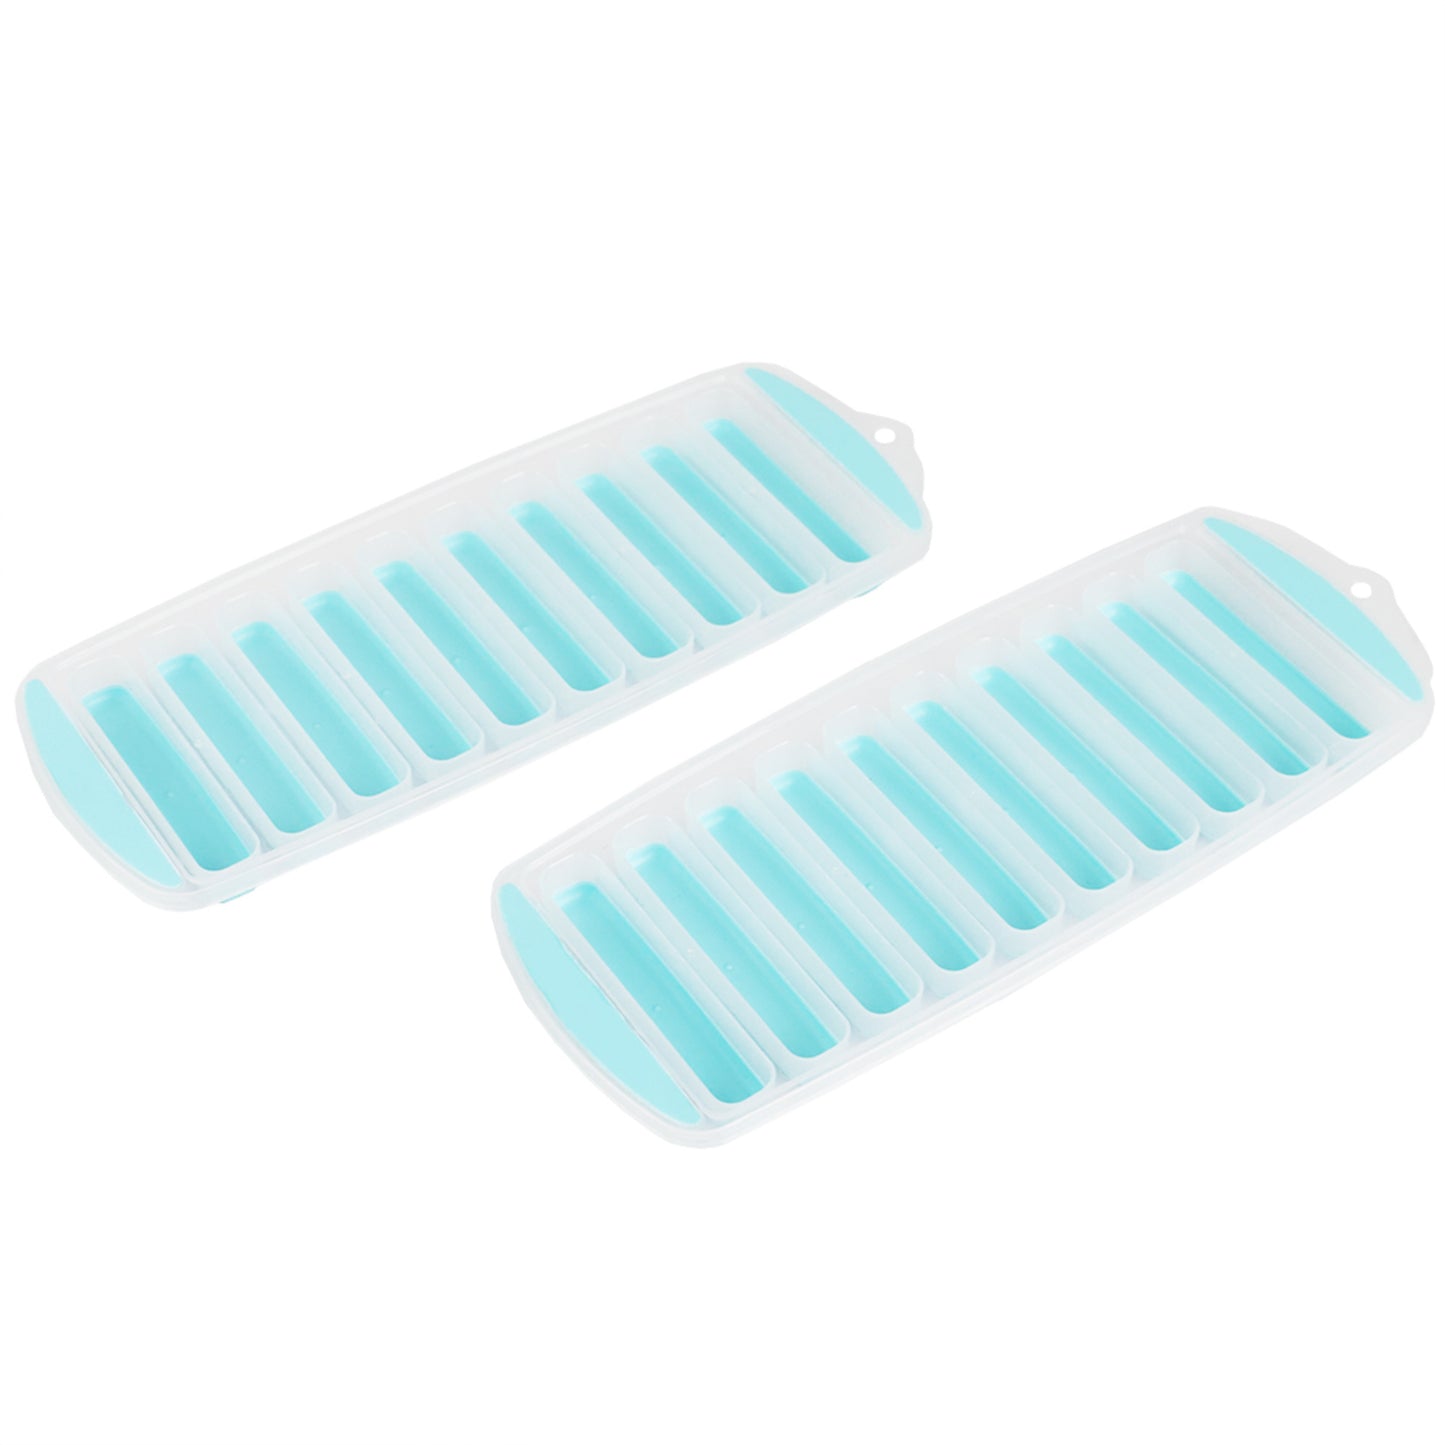 Home Basics Ultra-Slim Plastic Pop-Out Ice Cube Tray, (Pack of 2), Turquoise - Turquoise